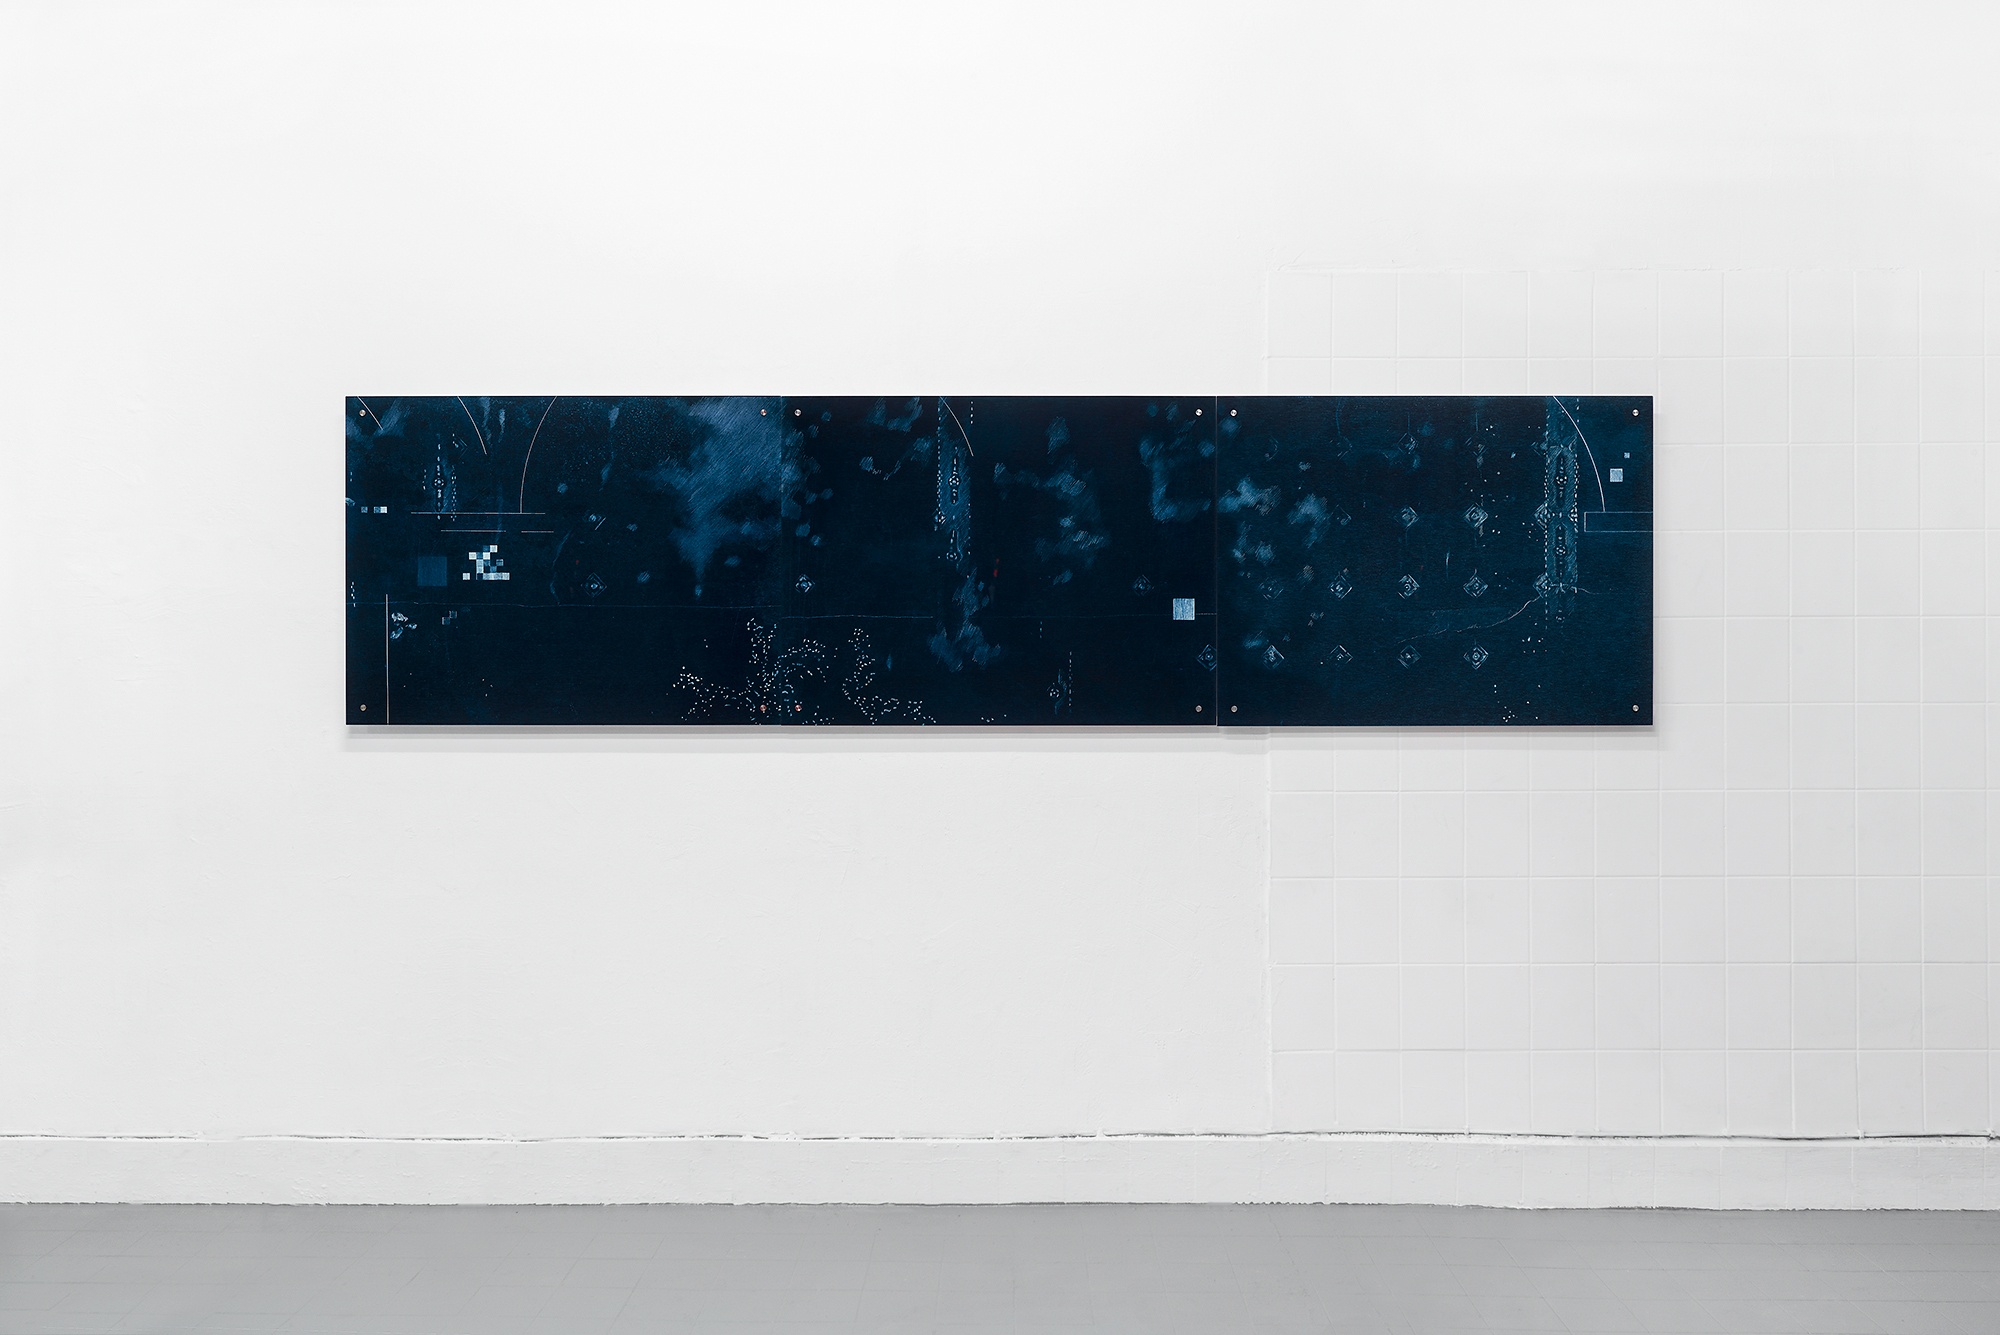 Rehearsal for demolition - 2020, UV-print on glass, 29.5 x 118 inches / 75 x 300 cm